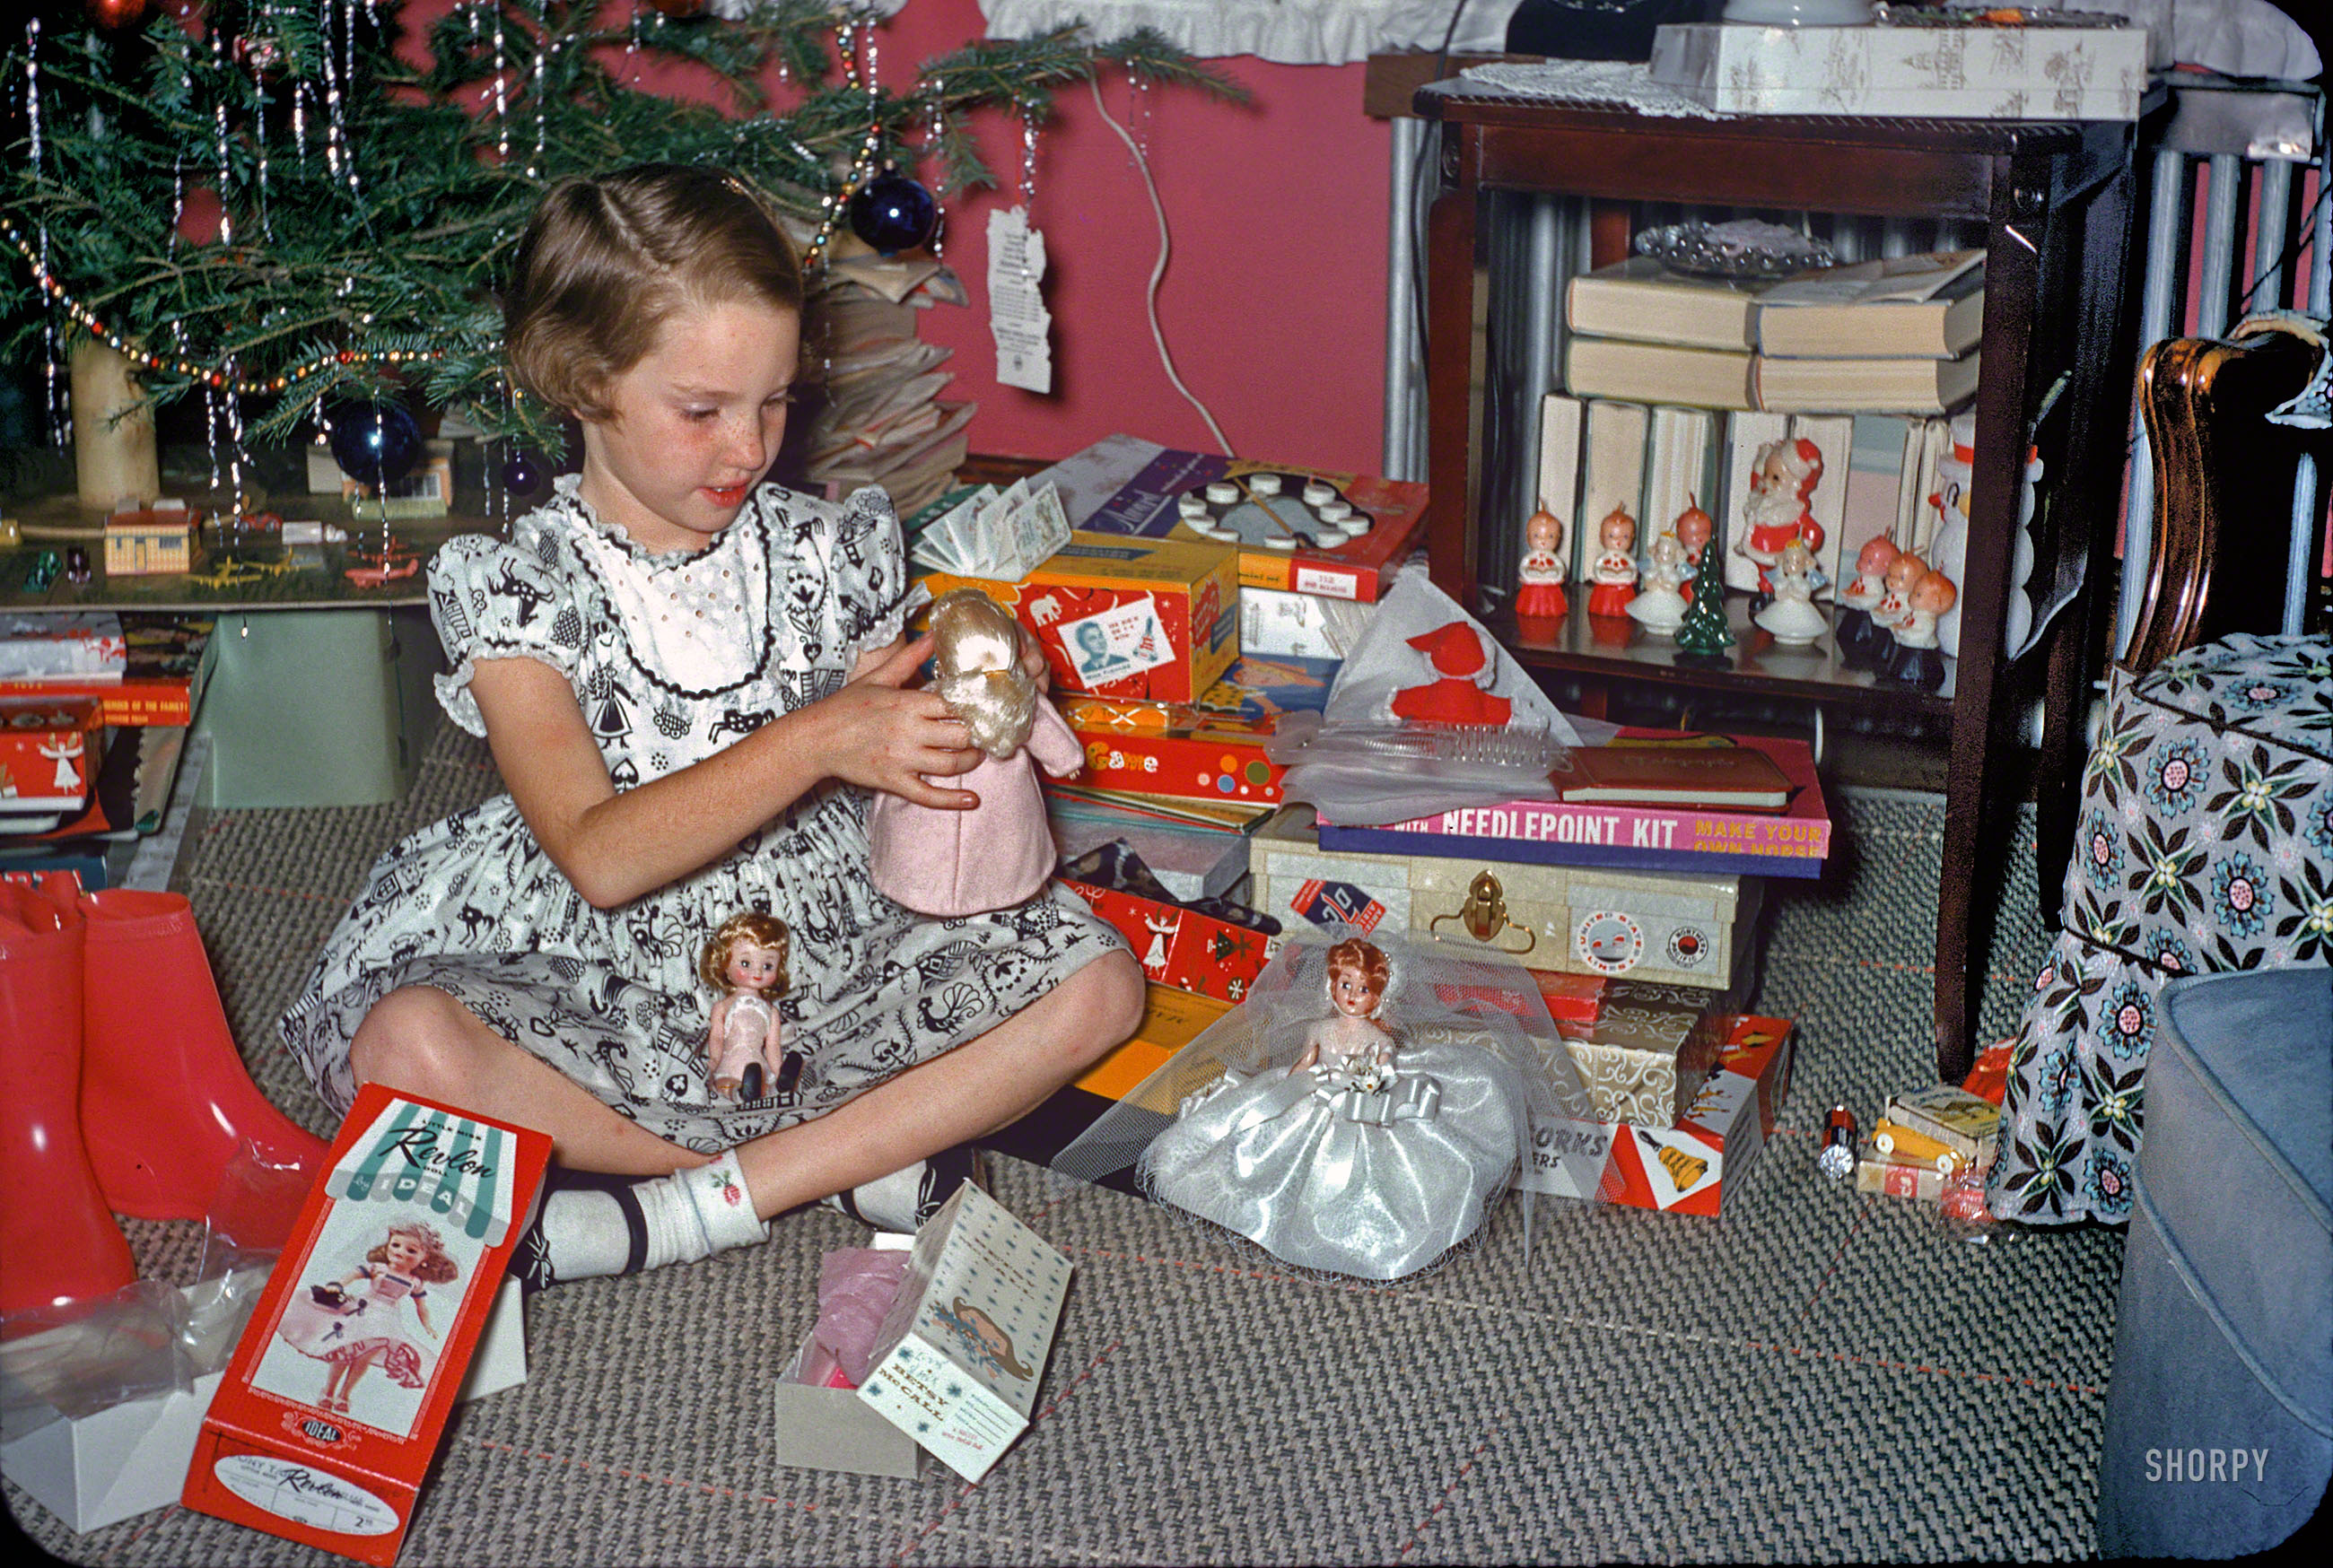 "Christmas 1957." Having seen the boy toys at Kermy and Janet's house in Baltimore, we now move on to the girl gifts, which include Little Miss Revlon and Betsy McCall dolls as well as a Fun With Needlepoint Kit ("Make your own horse"). What else do we recognize here? 35mm Kodachrome slide. View full size.